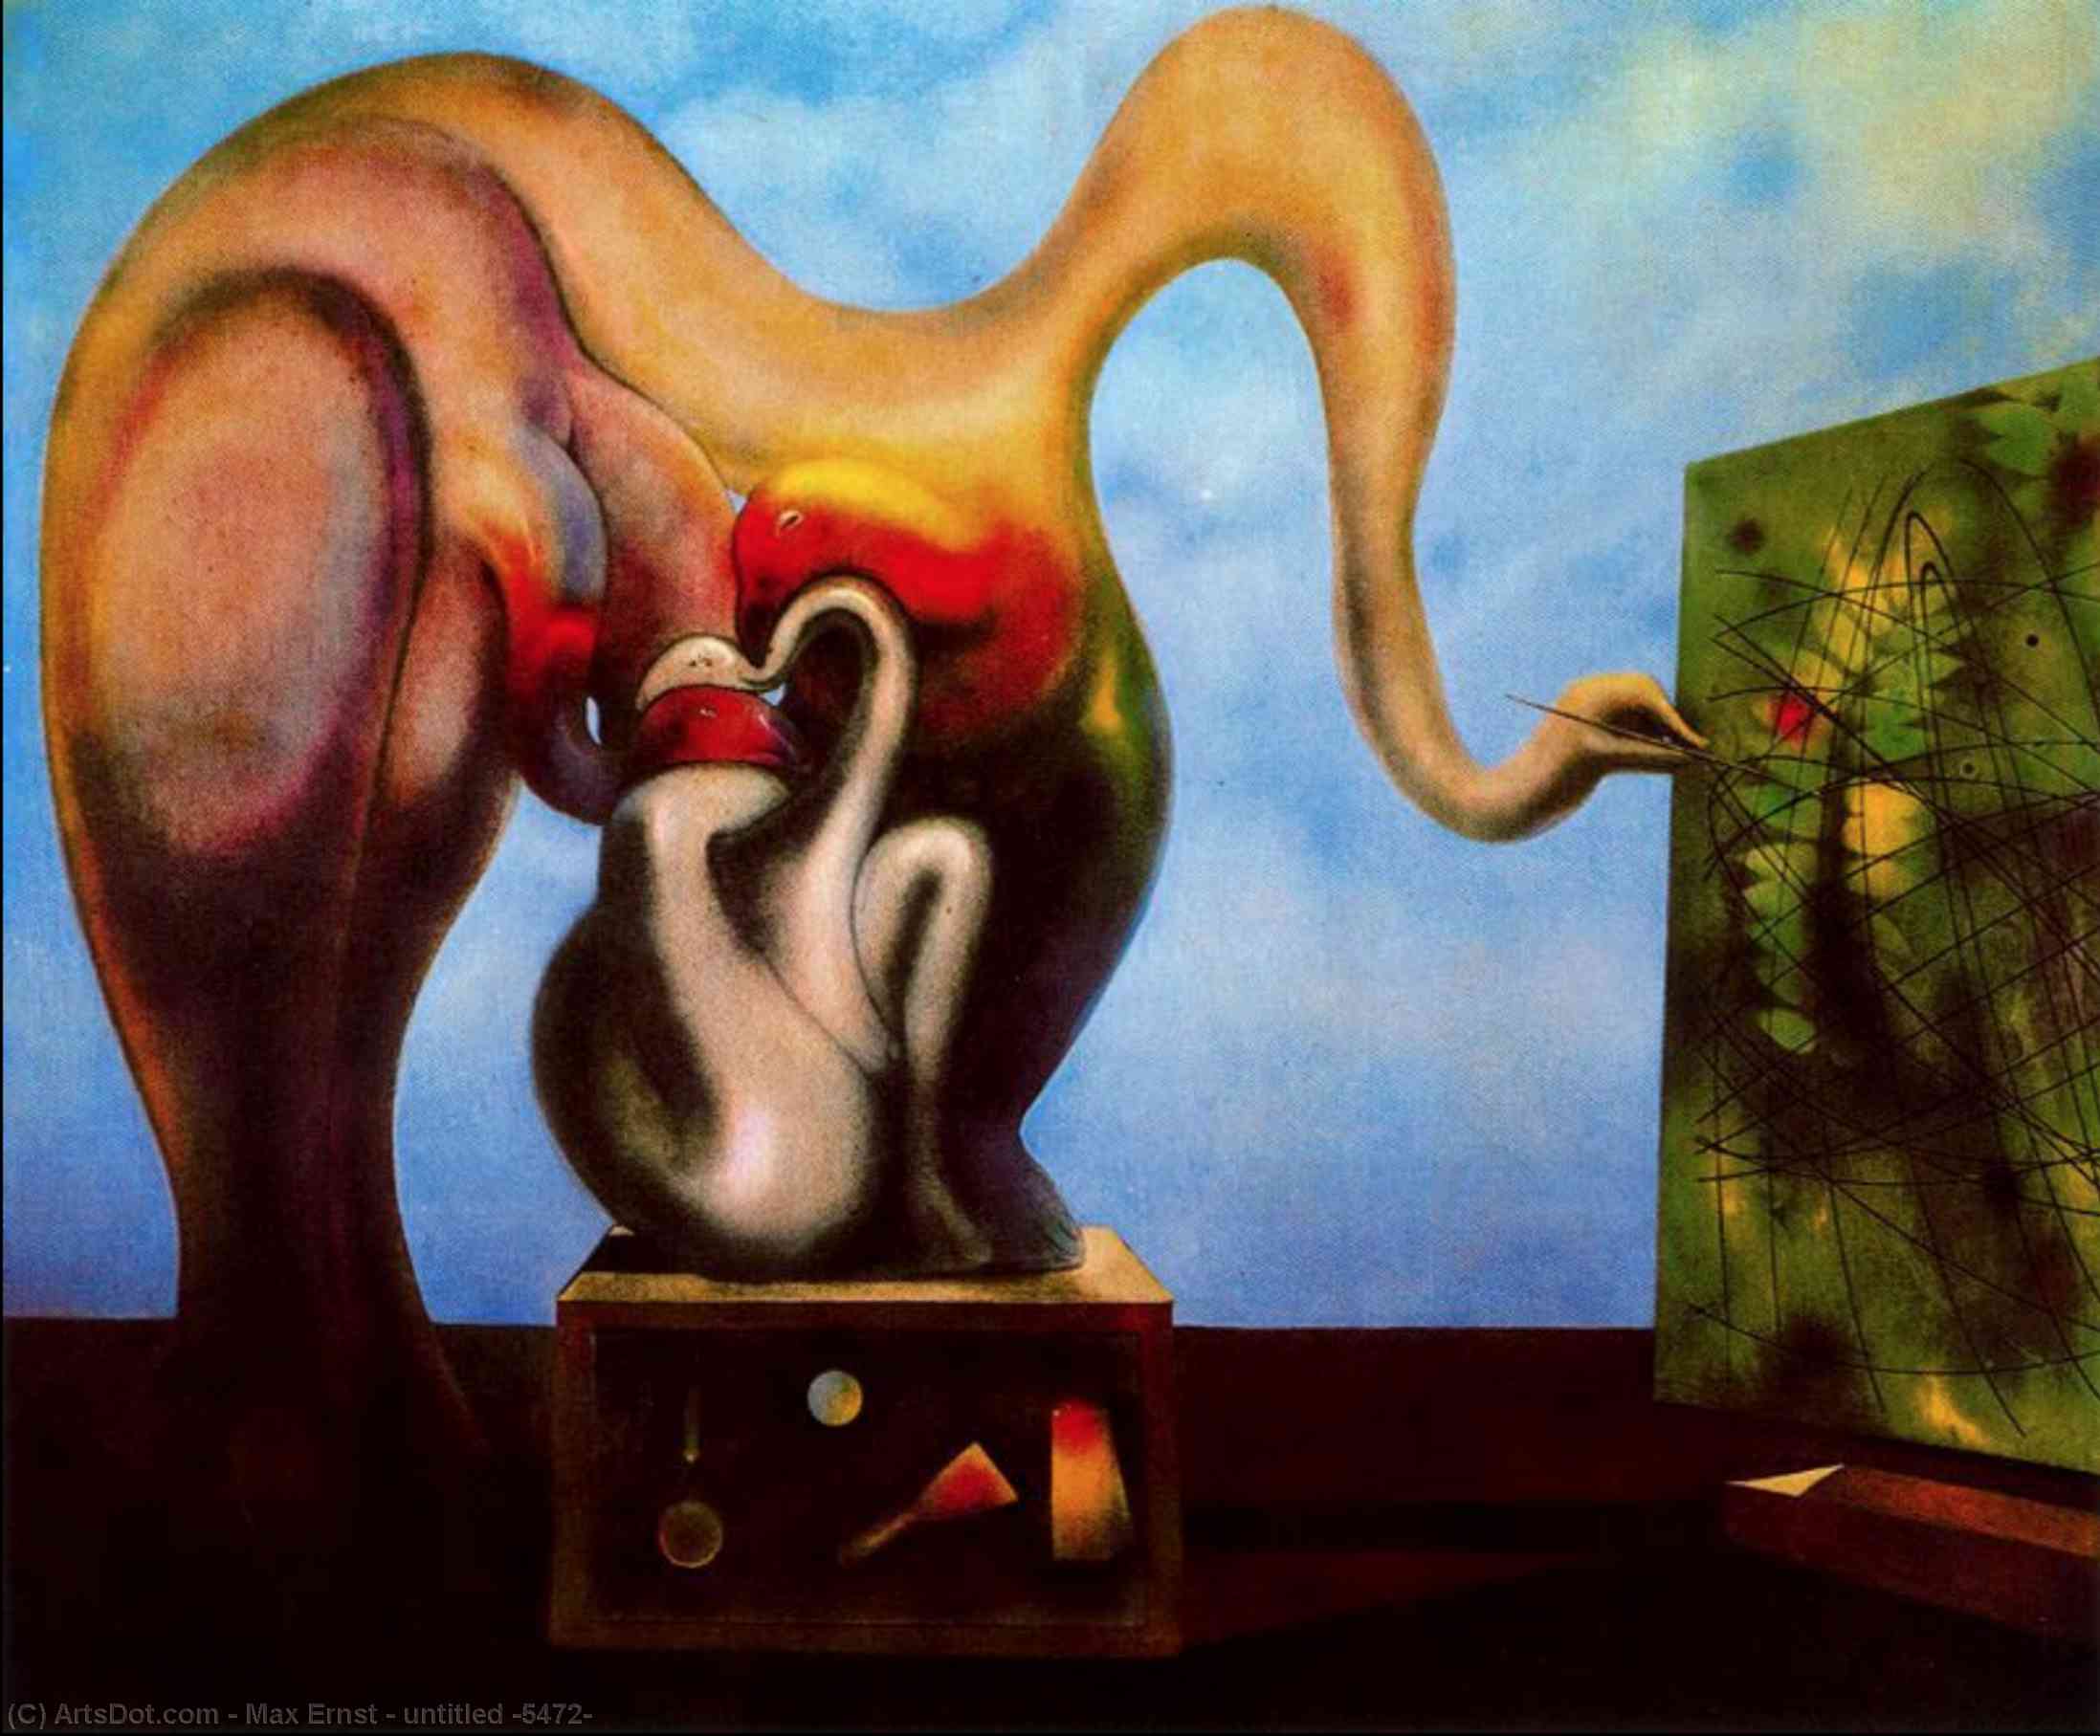 WikiOO.org - Encyclopedia of Fine Arts - Maalaus, taideteos Max Ernst - untitled (5472)